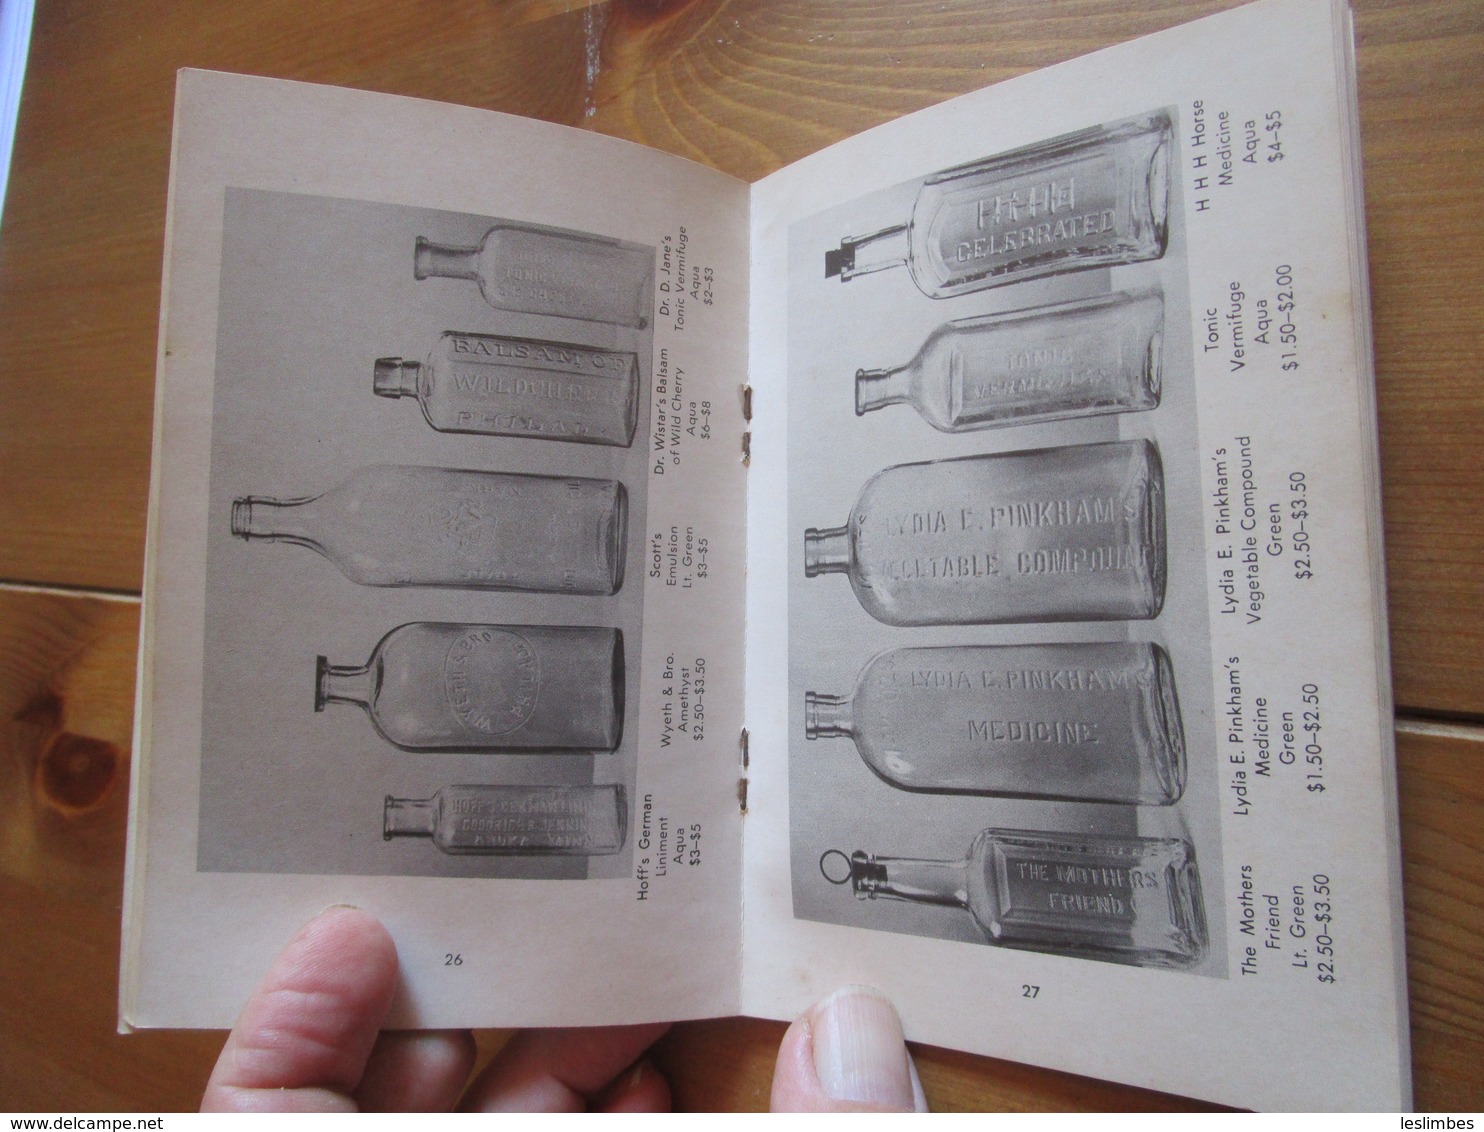 Pocket Field Guide For The Bottle Digger By Marvin And Helen Davis. Old Bottle Collecting Publications, 1968 - Livres Sur Les Collections